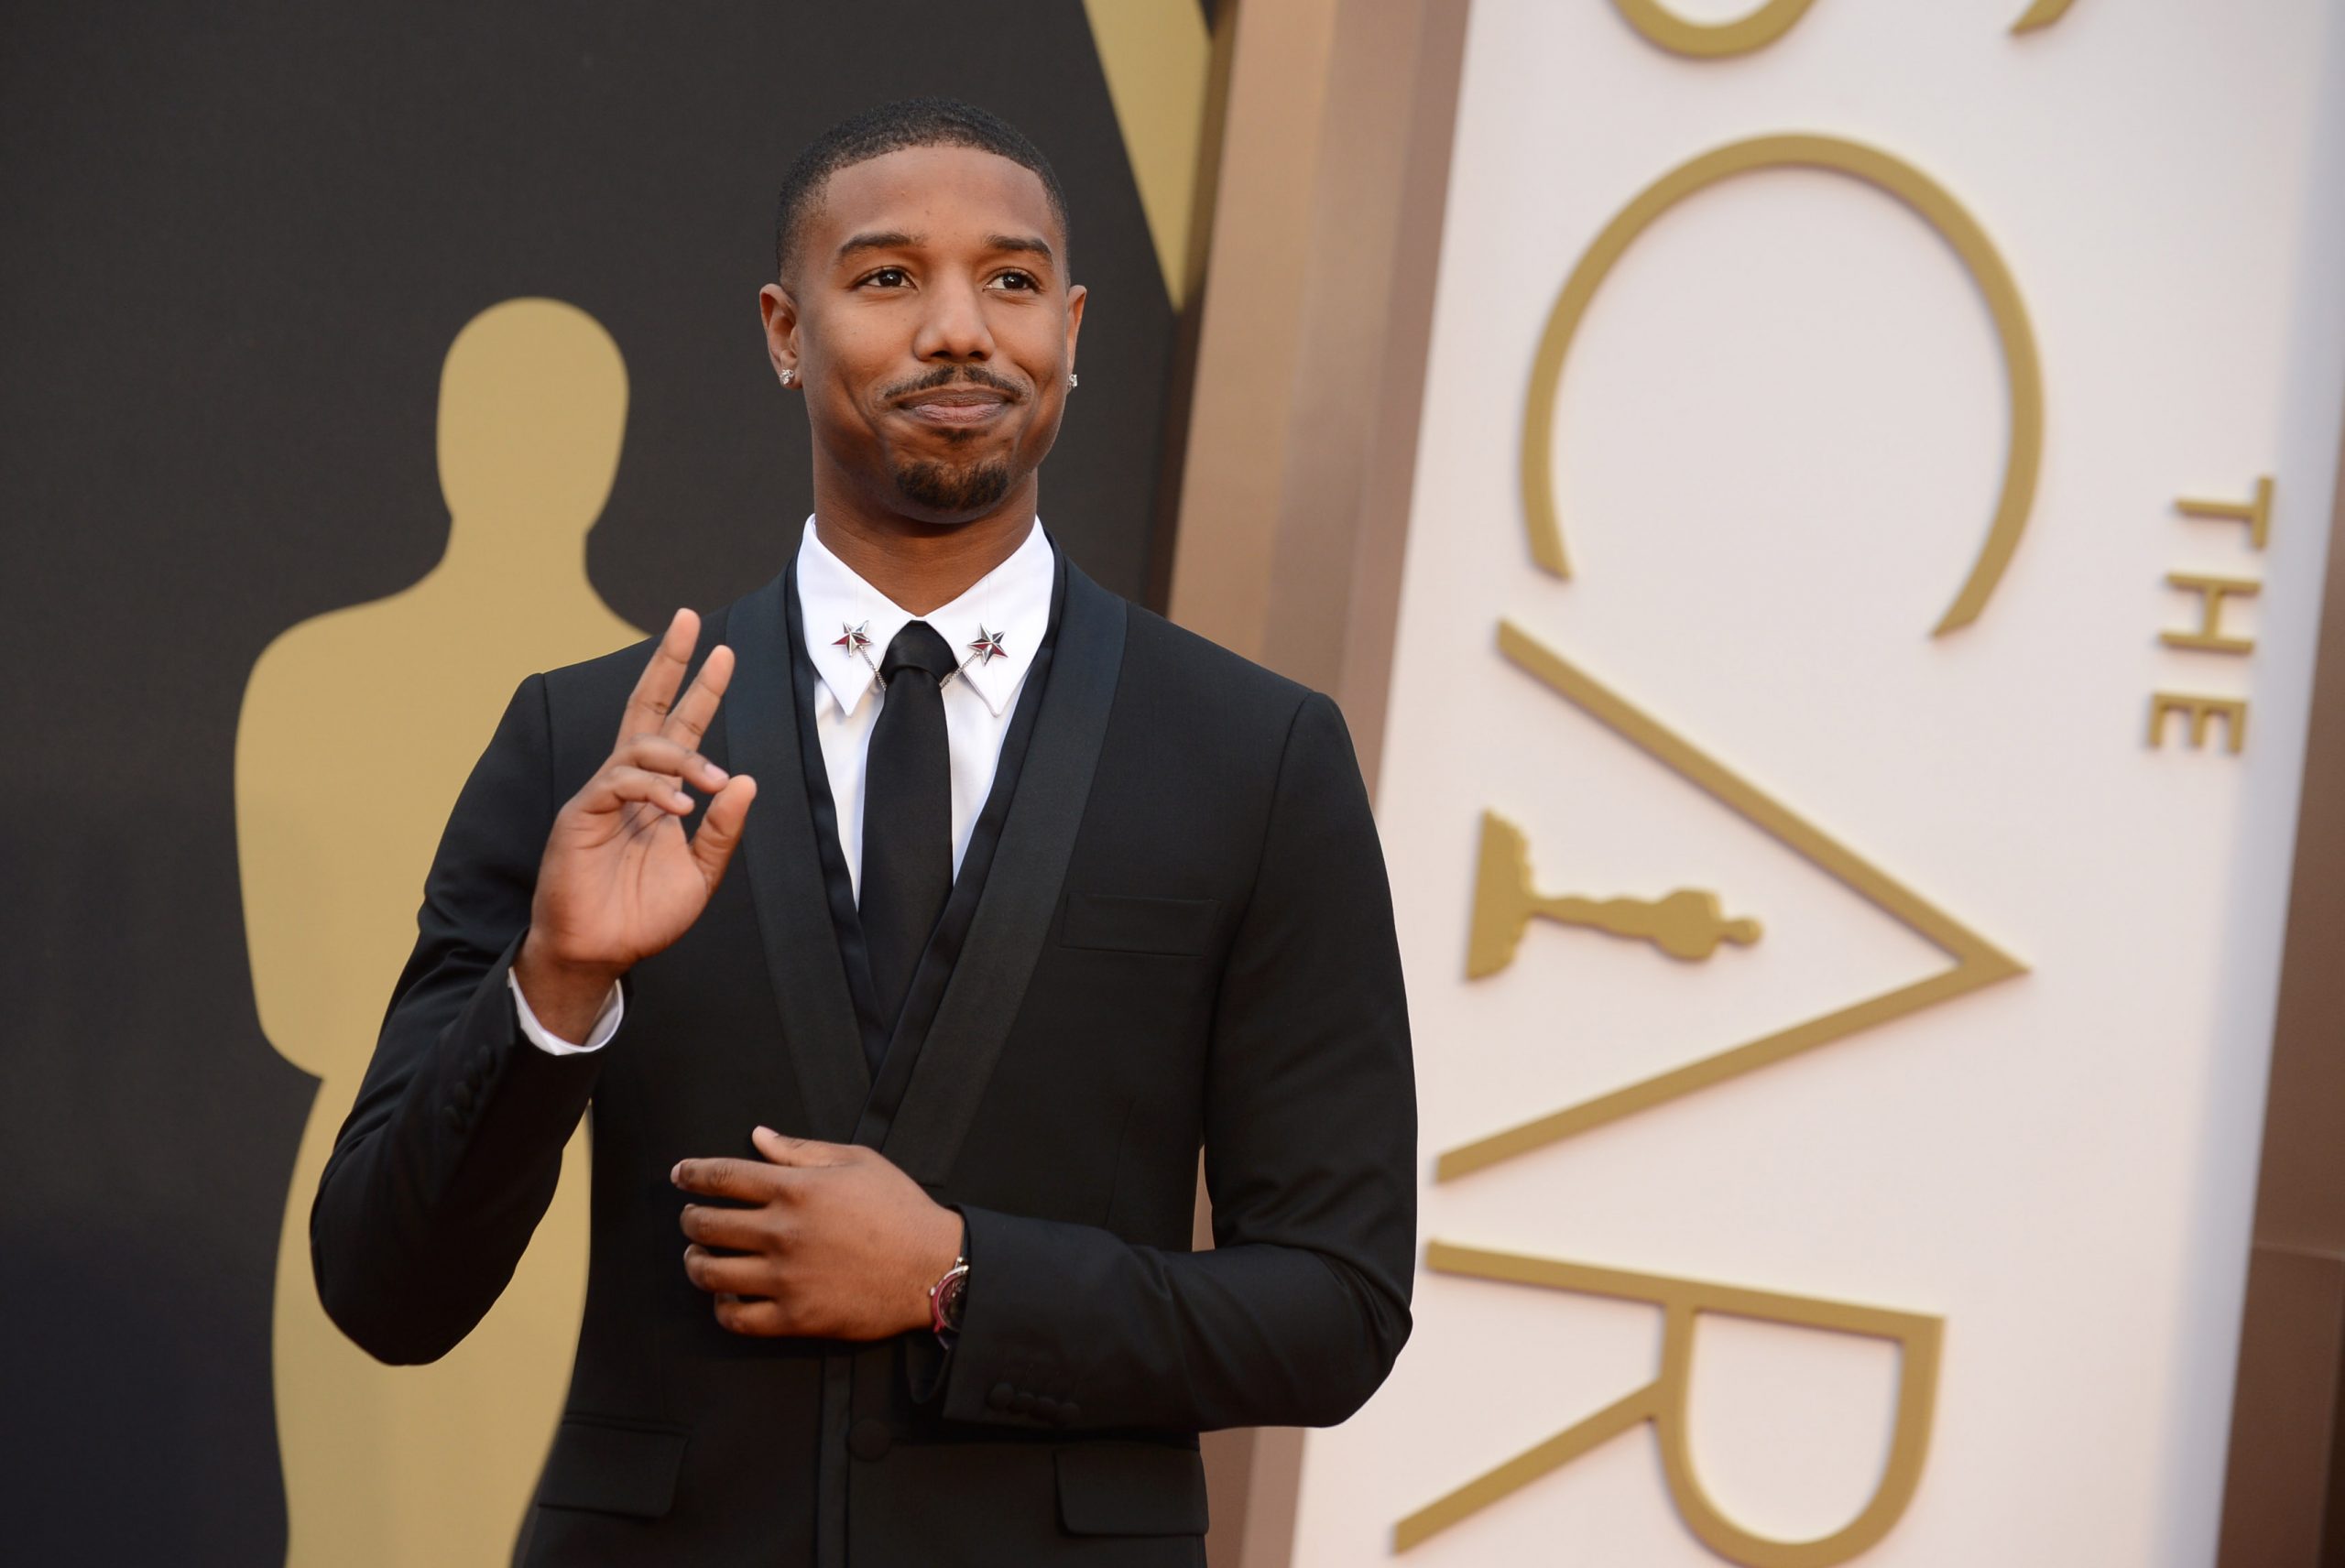 A video of Michael B. Jordan fresh off his breakup with Lori Harvey went viral during the Warriors-Celtics NBA Finals Game 2 Sunday